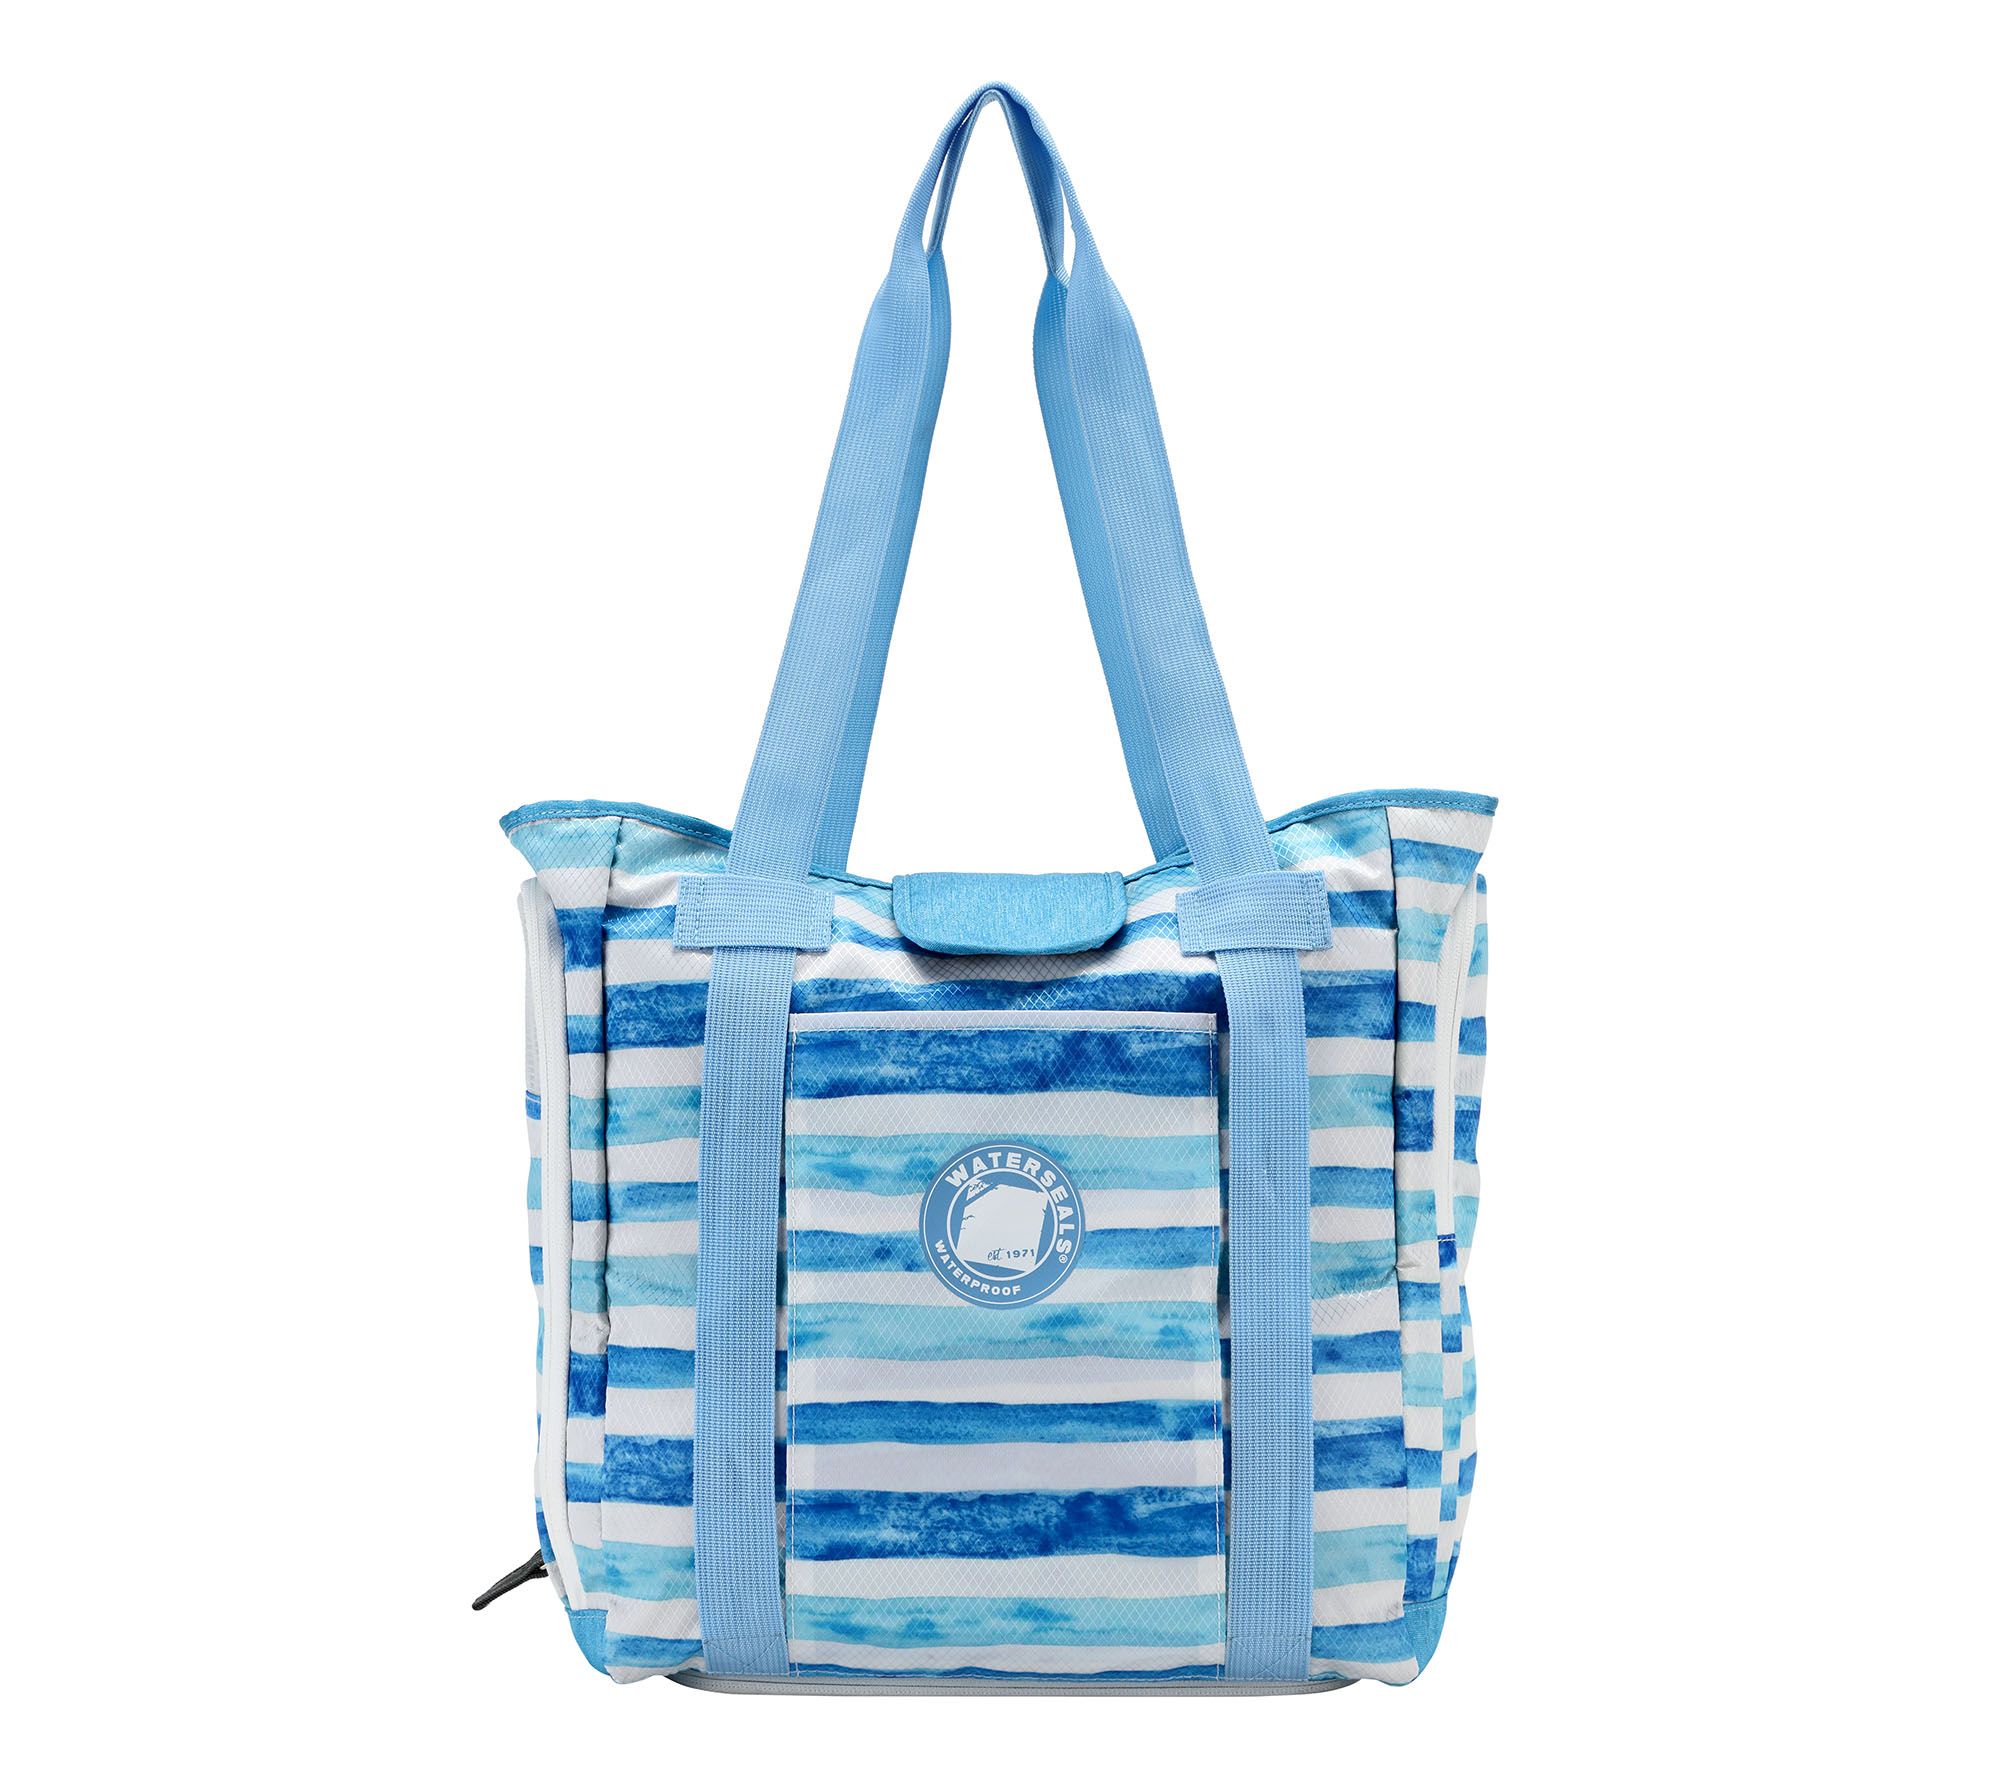 Waterseals Ultimate Beach Tote with Sand Away Lining - QVC.com